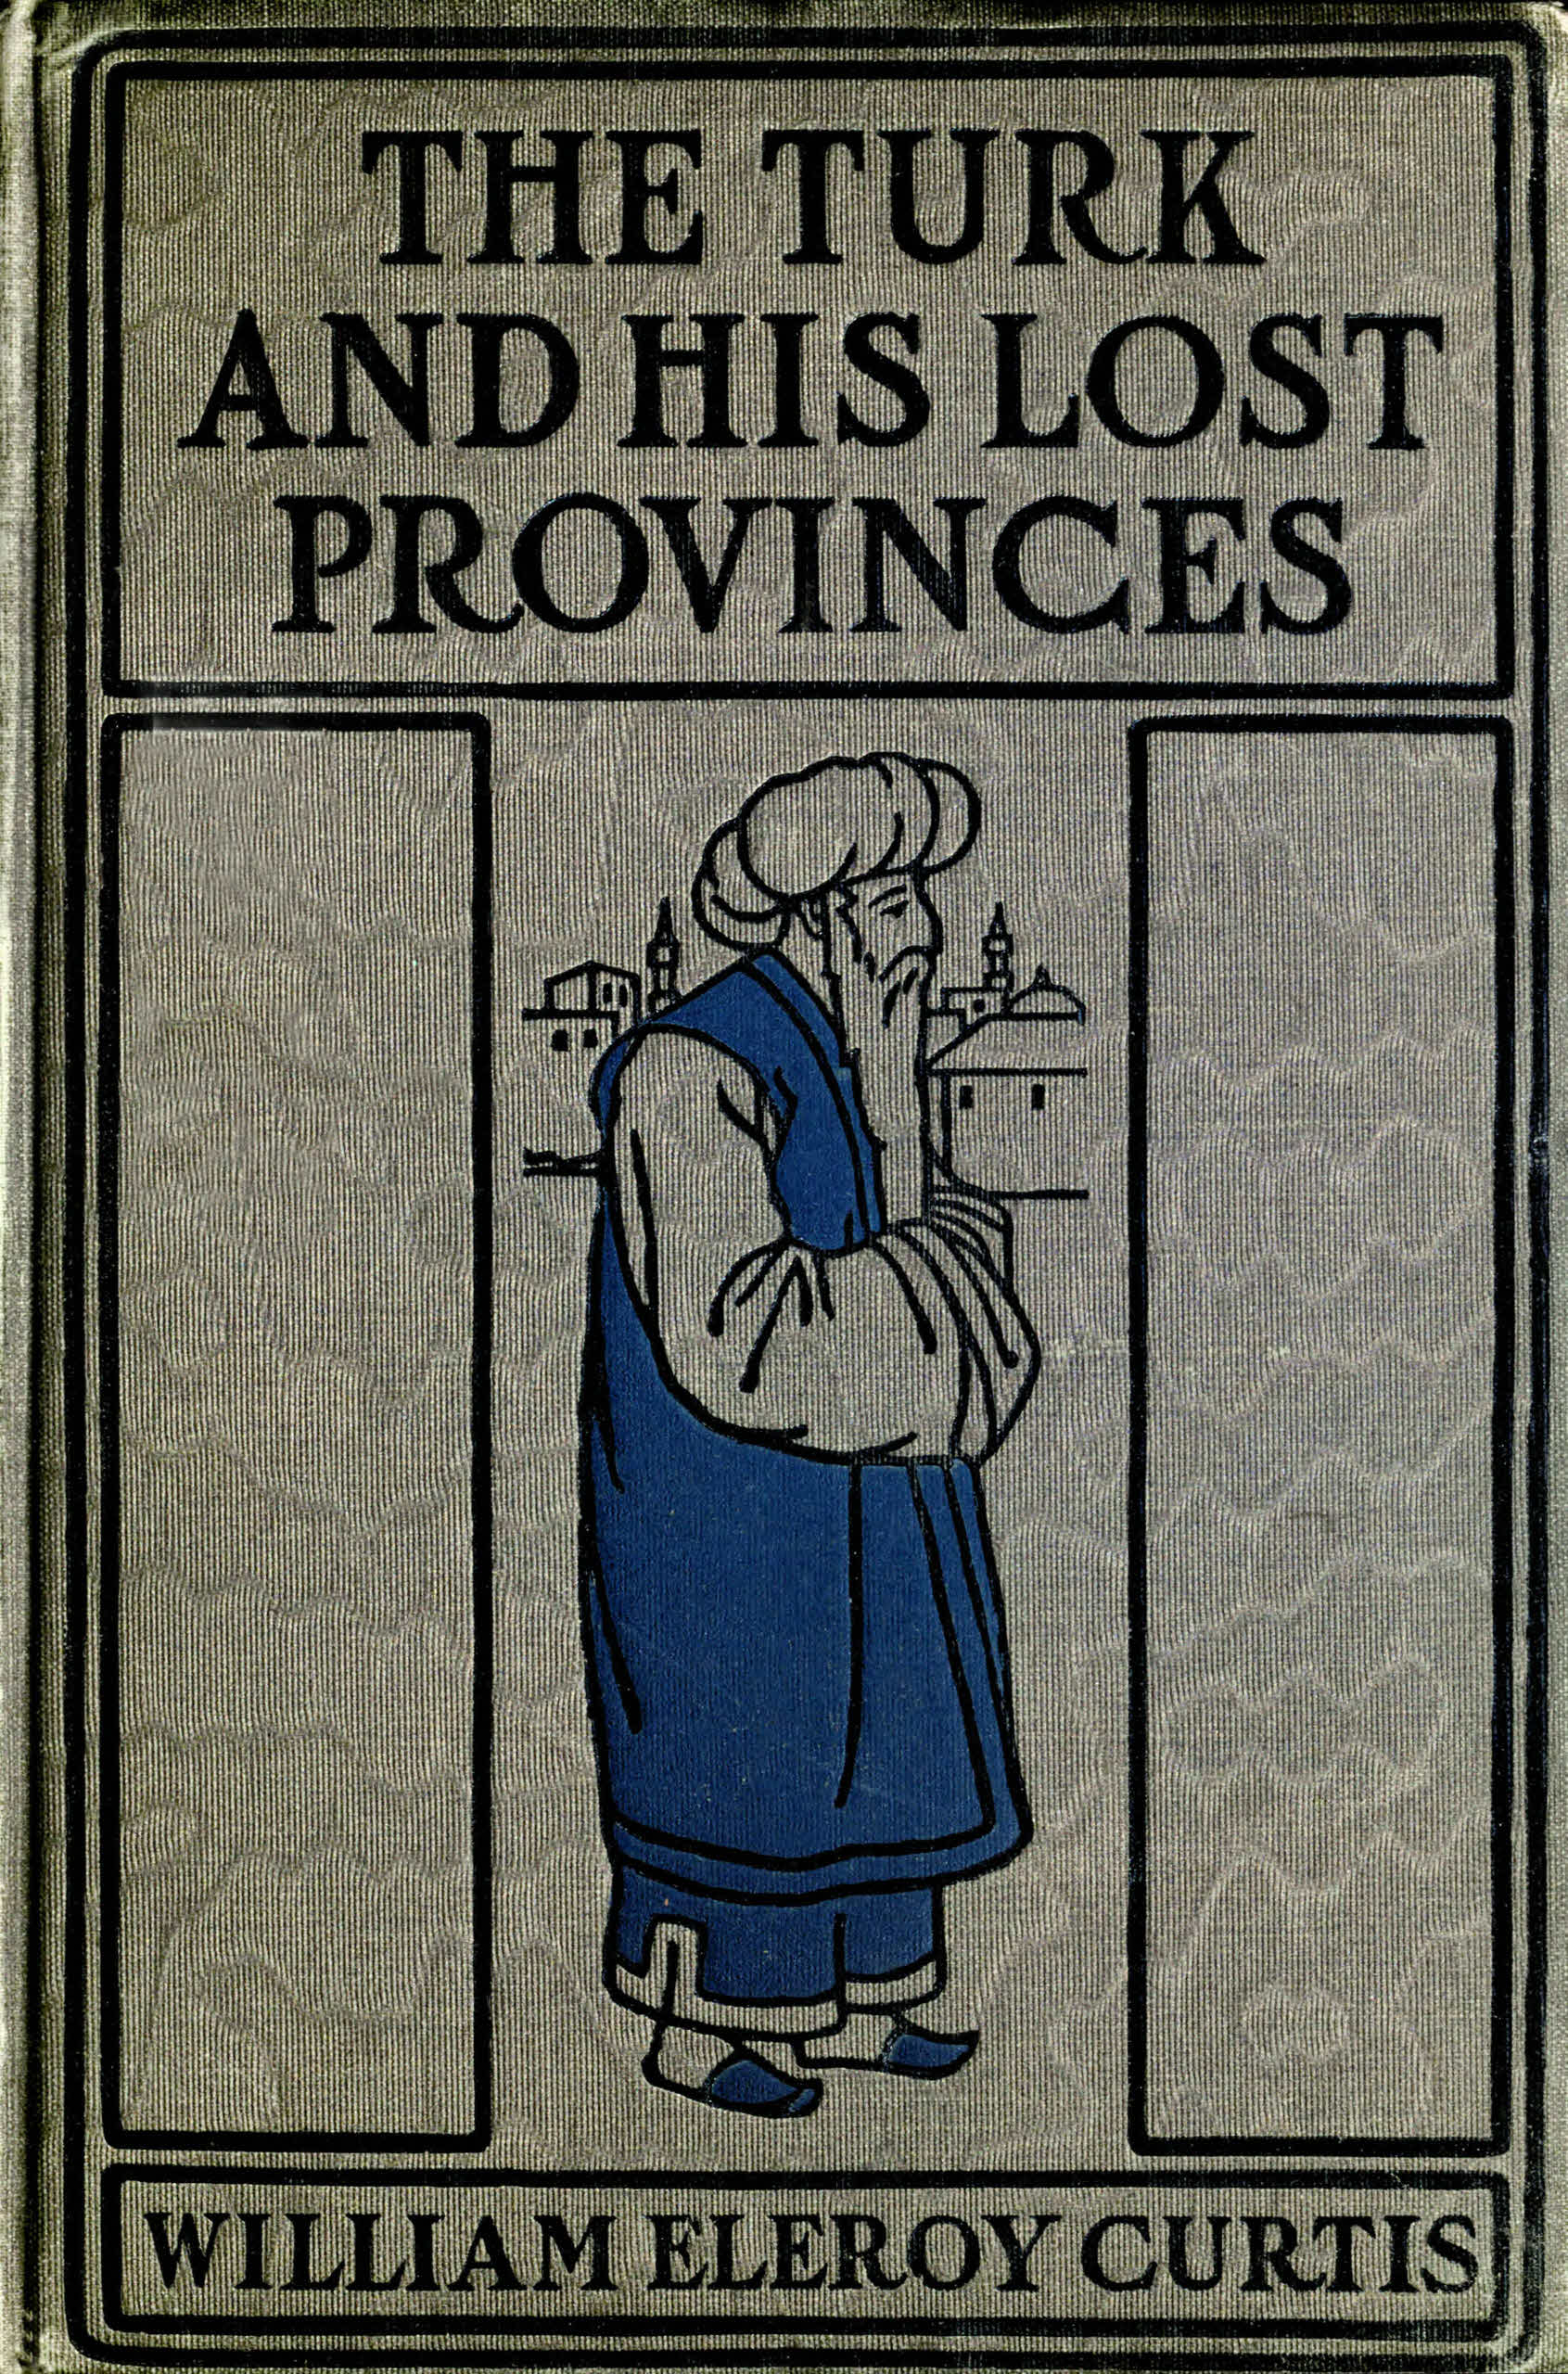 The Turk and his lost provinces Project Gutenberg